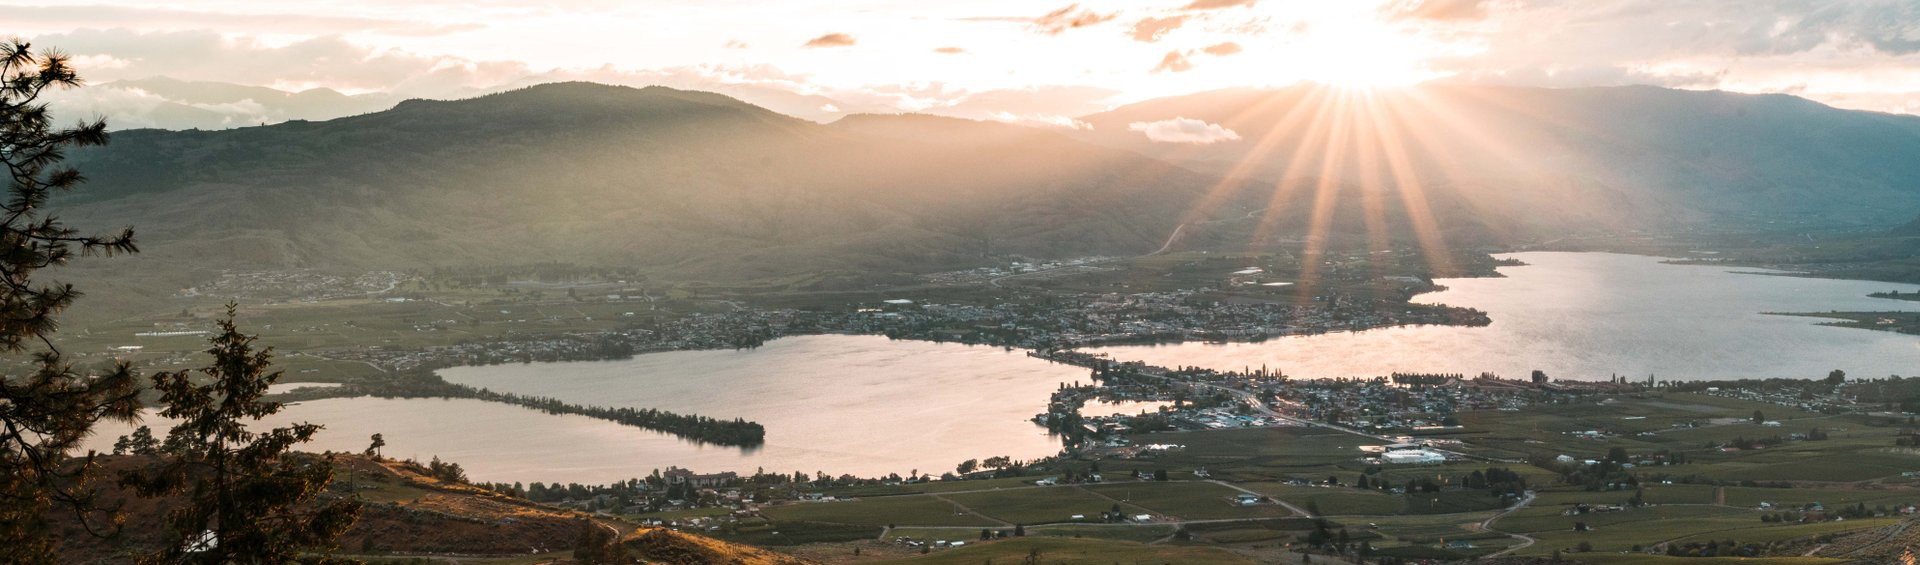 Osoyoos view from the air